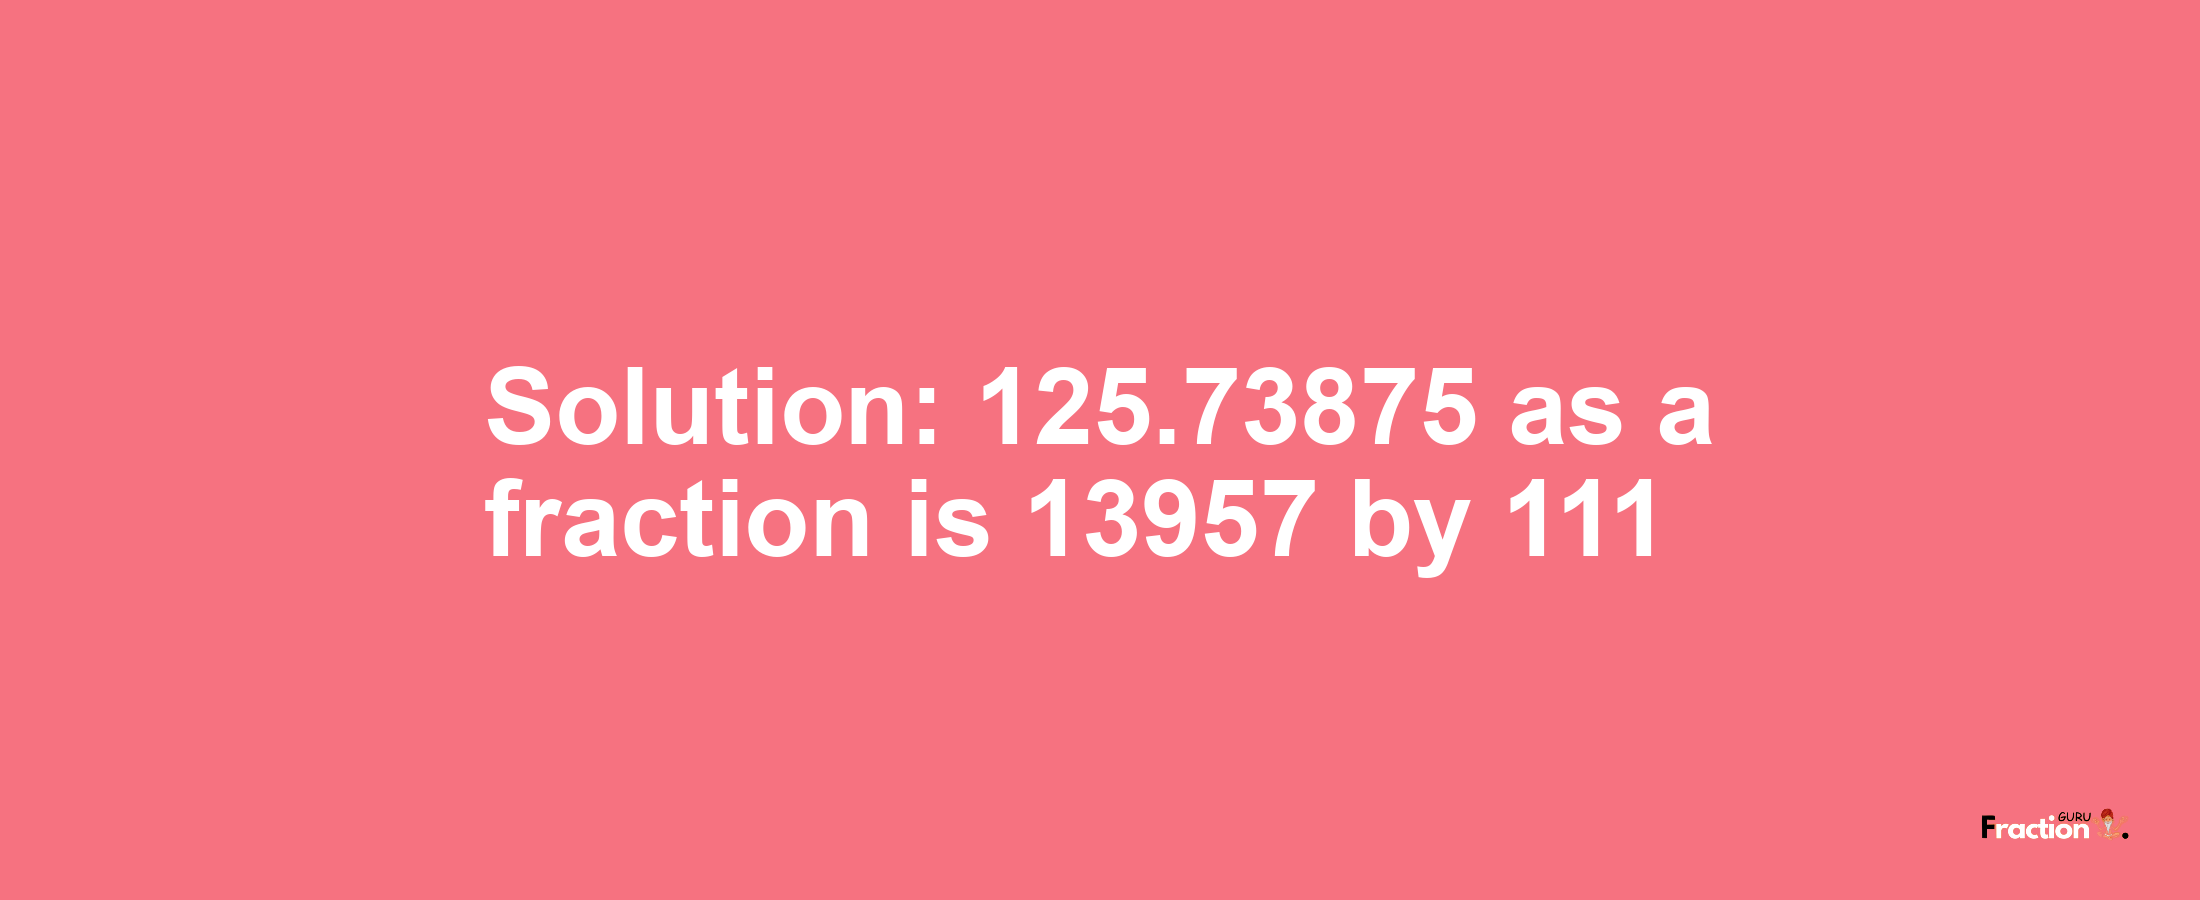 Solution:125.73875 as a fraction is 13957/111